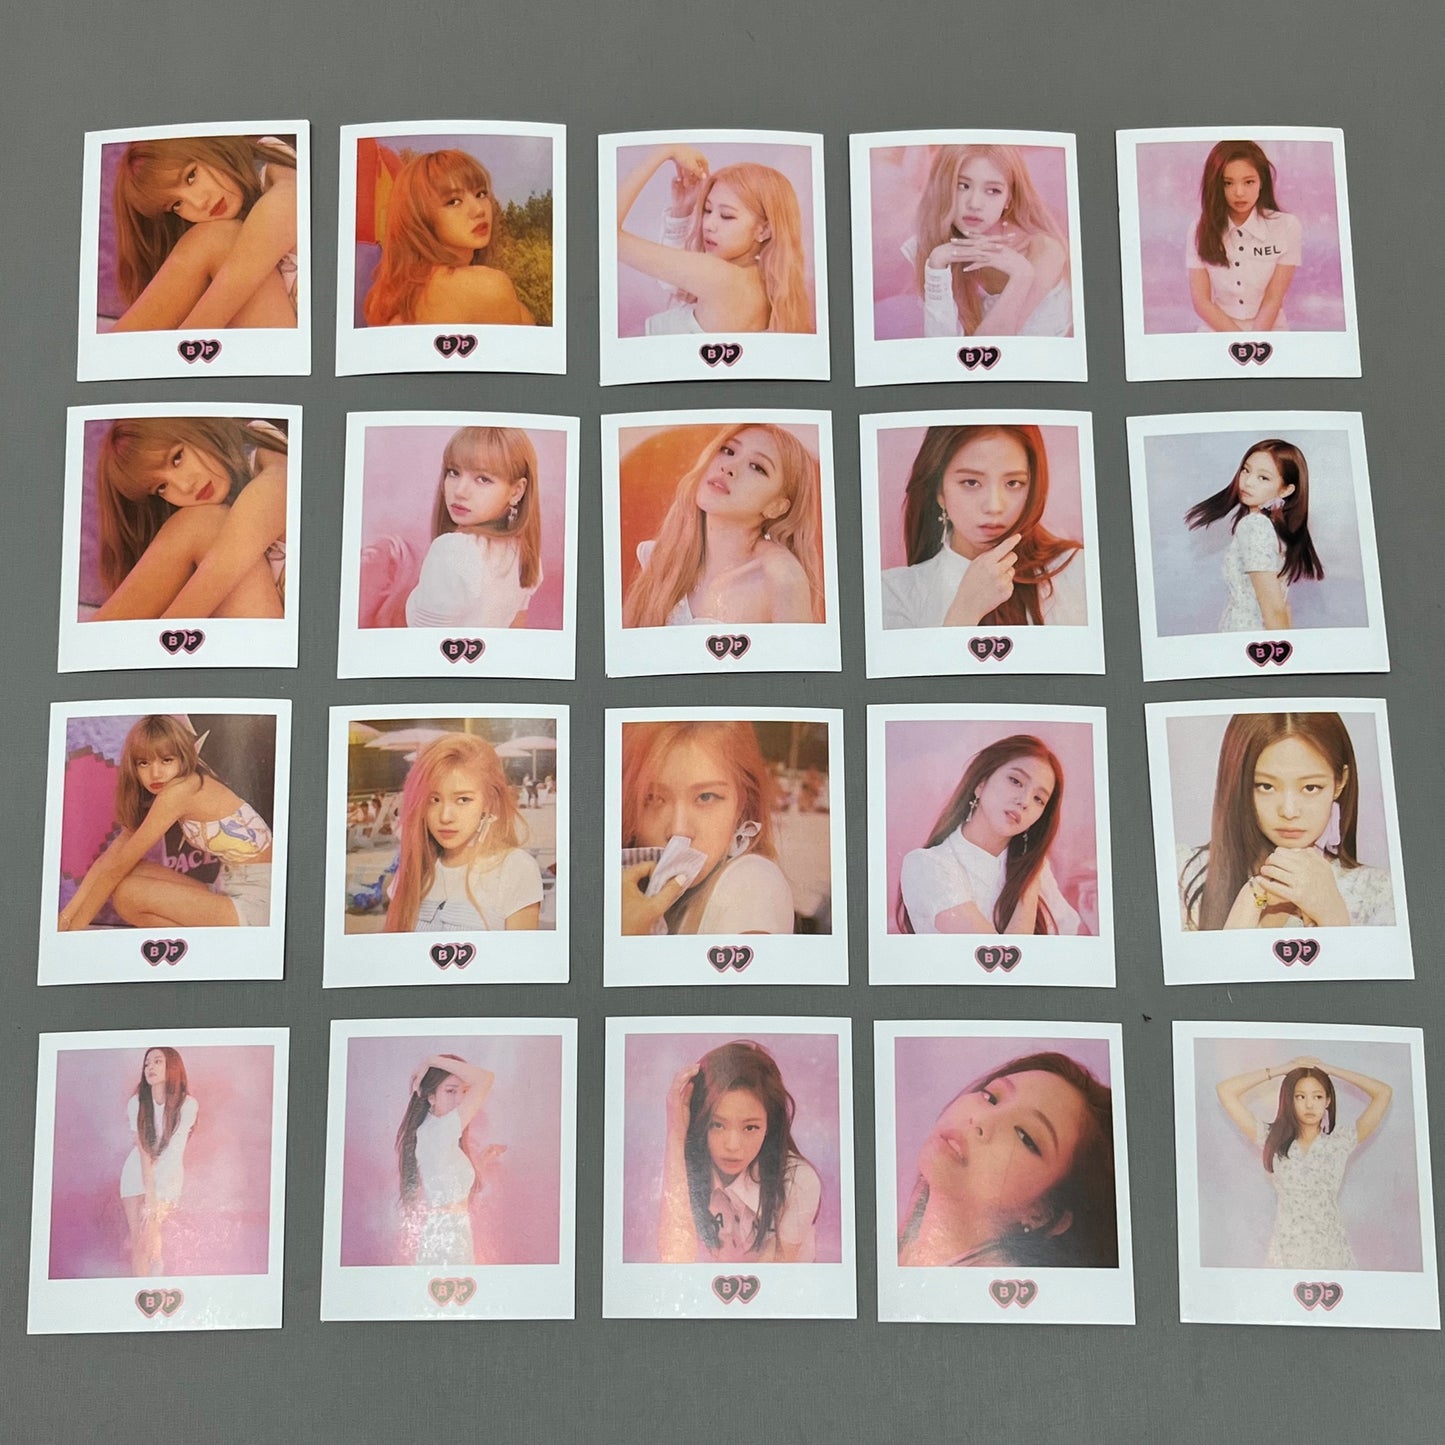 Lot of 13! BlackPink Photo Lomo Polaroid Pictures of Each Member With Clothes Pins